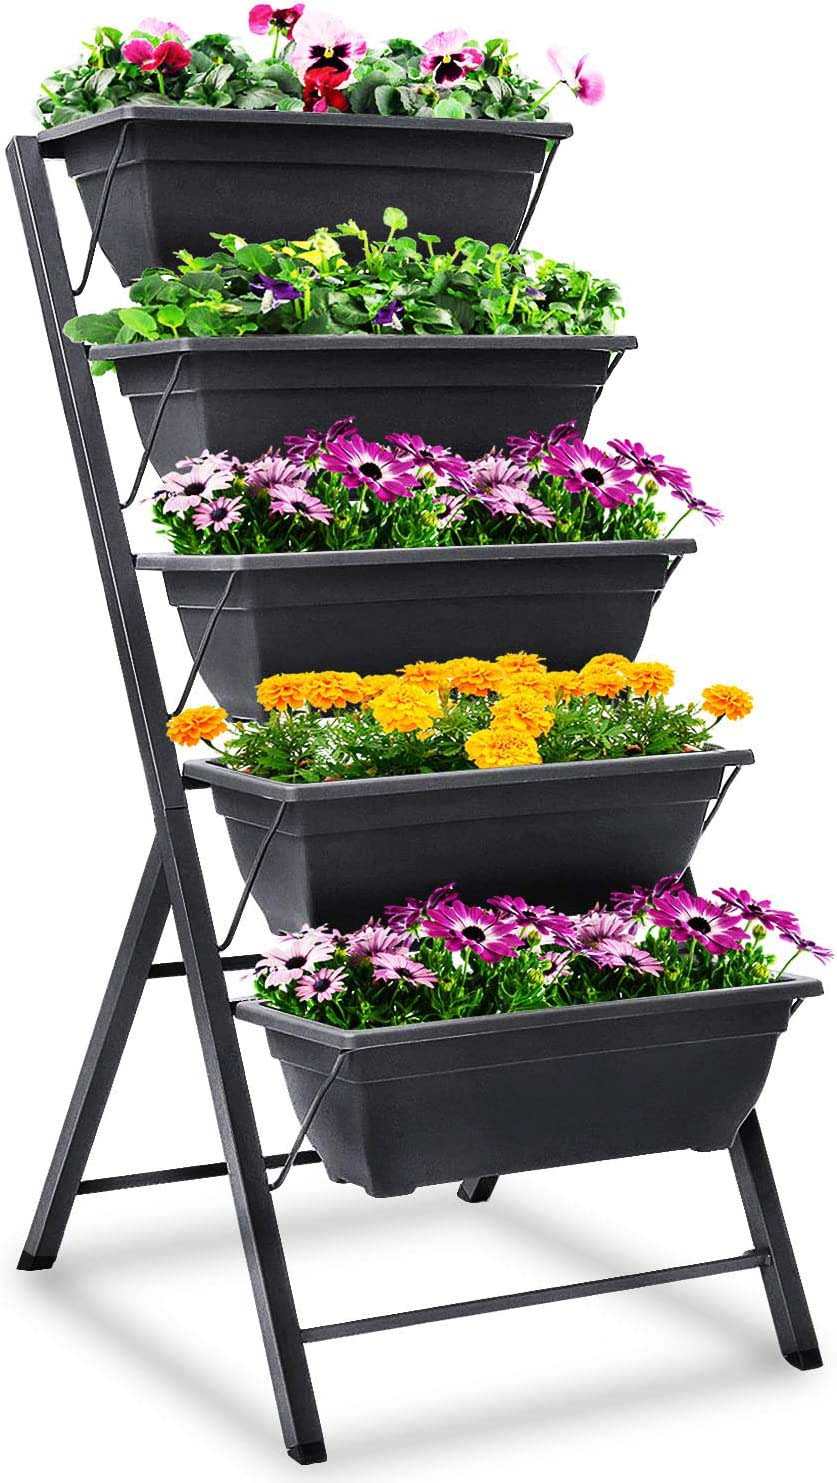 Tiered planters that are perfect for raised bed gardening